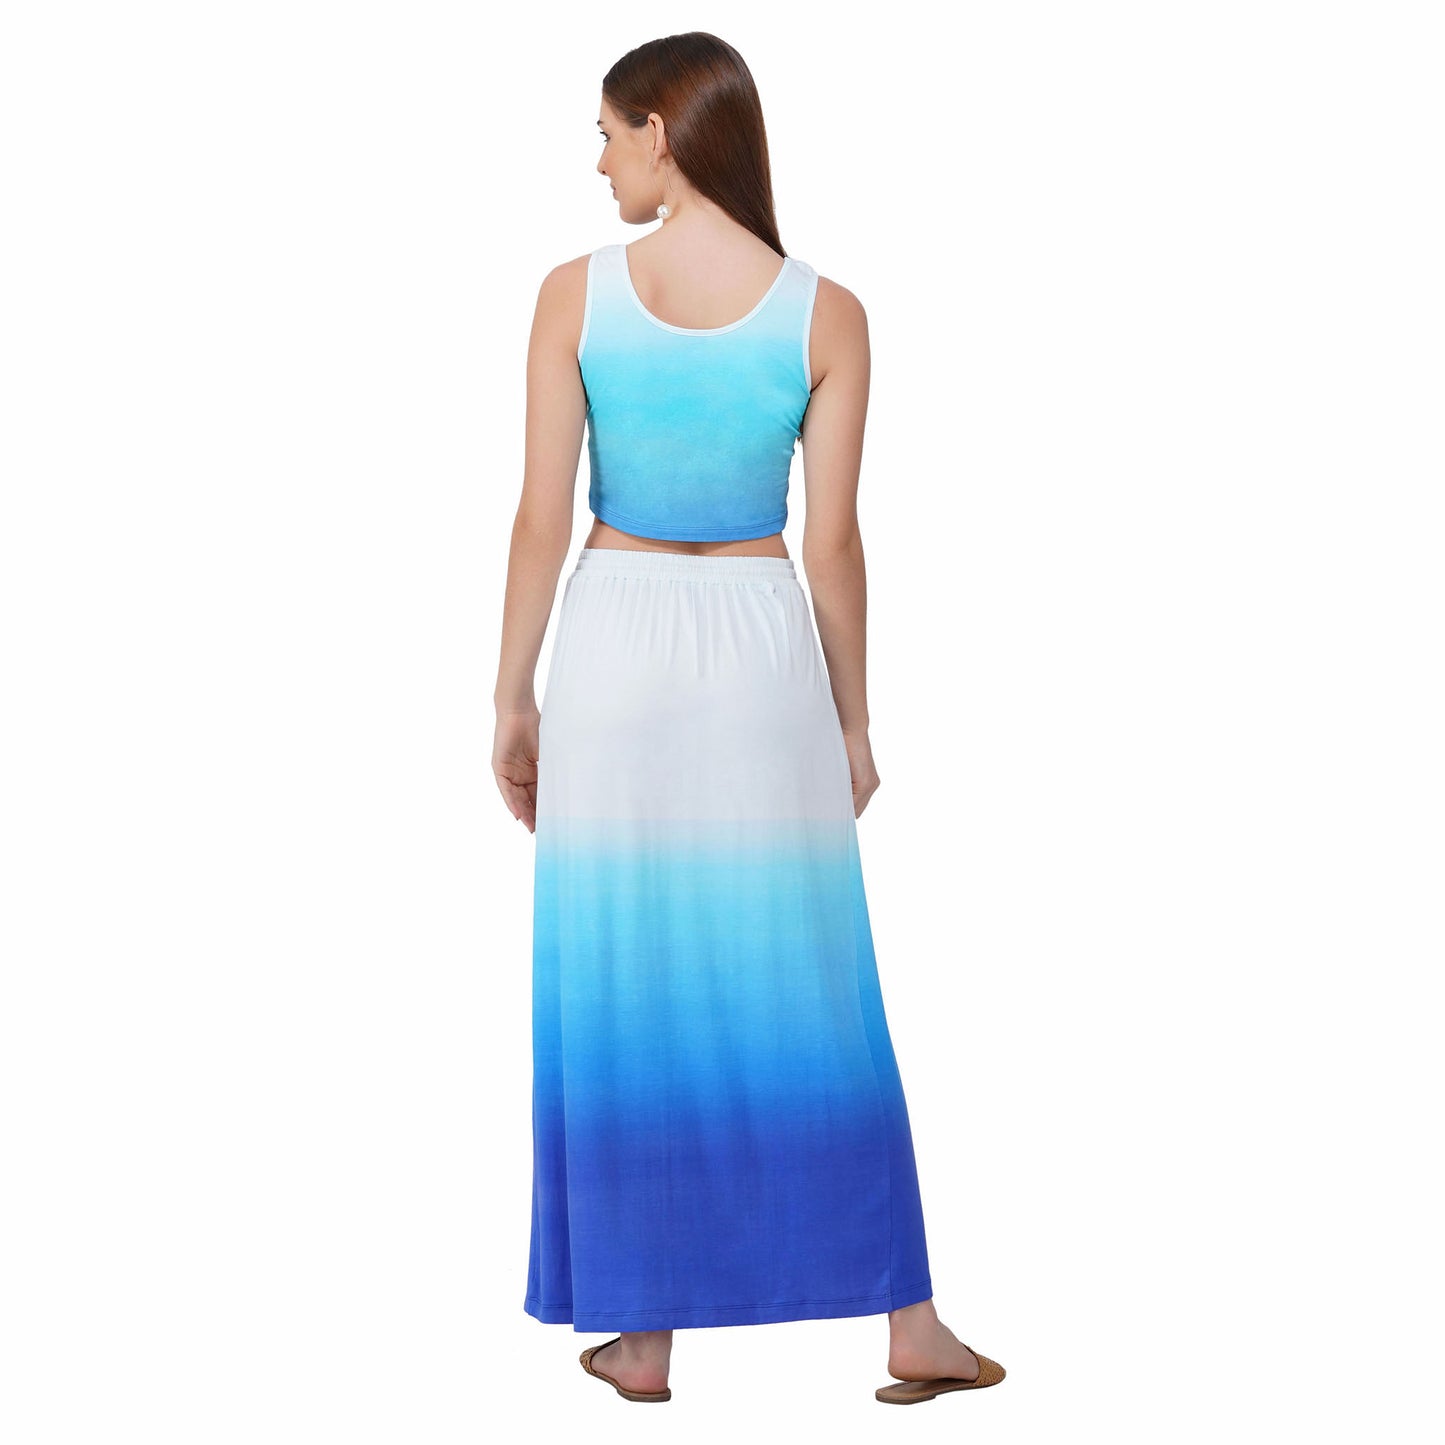 SLAY. Women's White to Blue Ombre Crop top & Skirt Co-ord Set